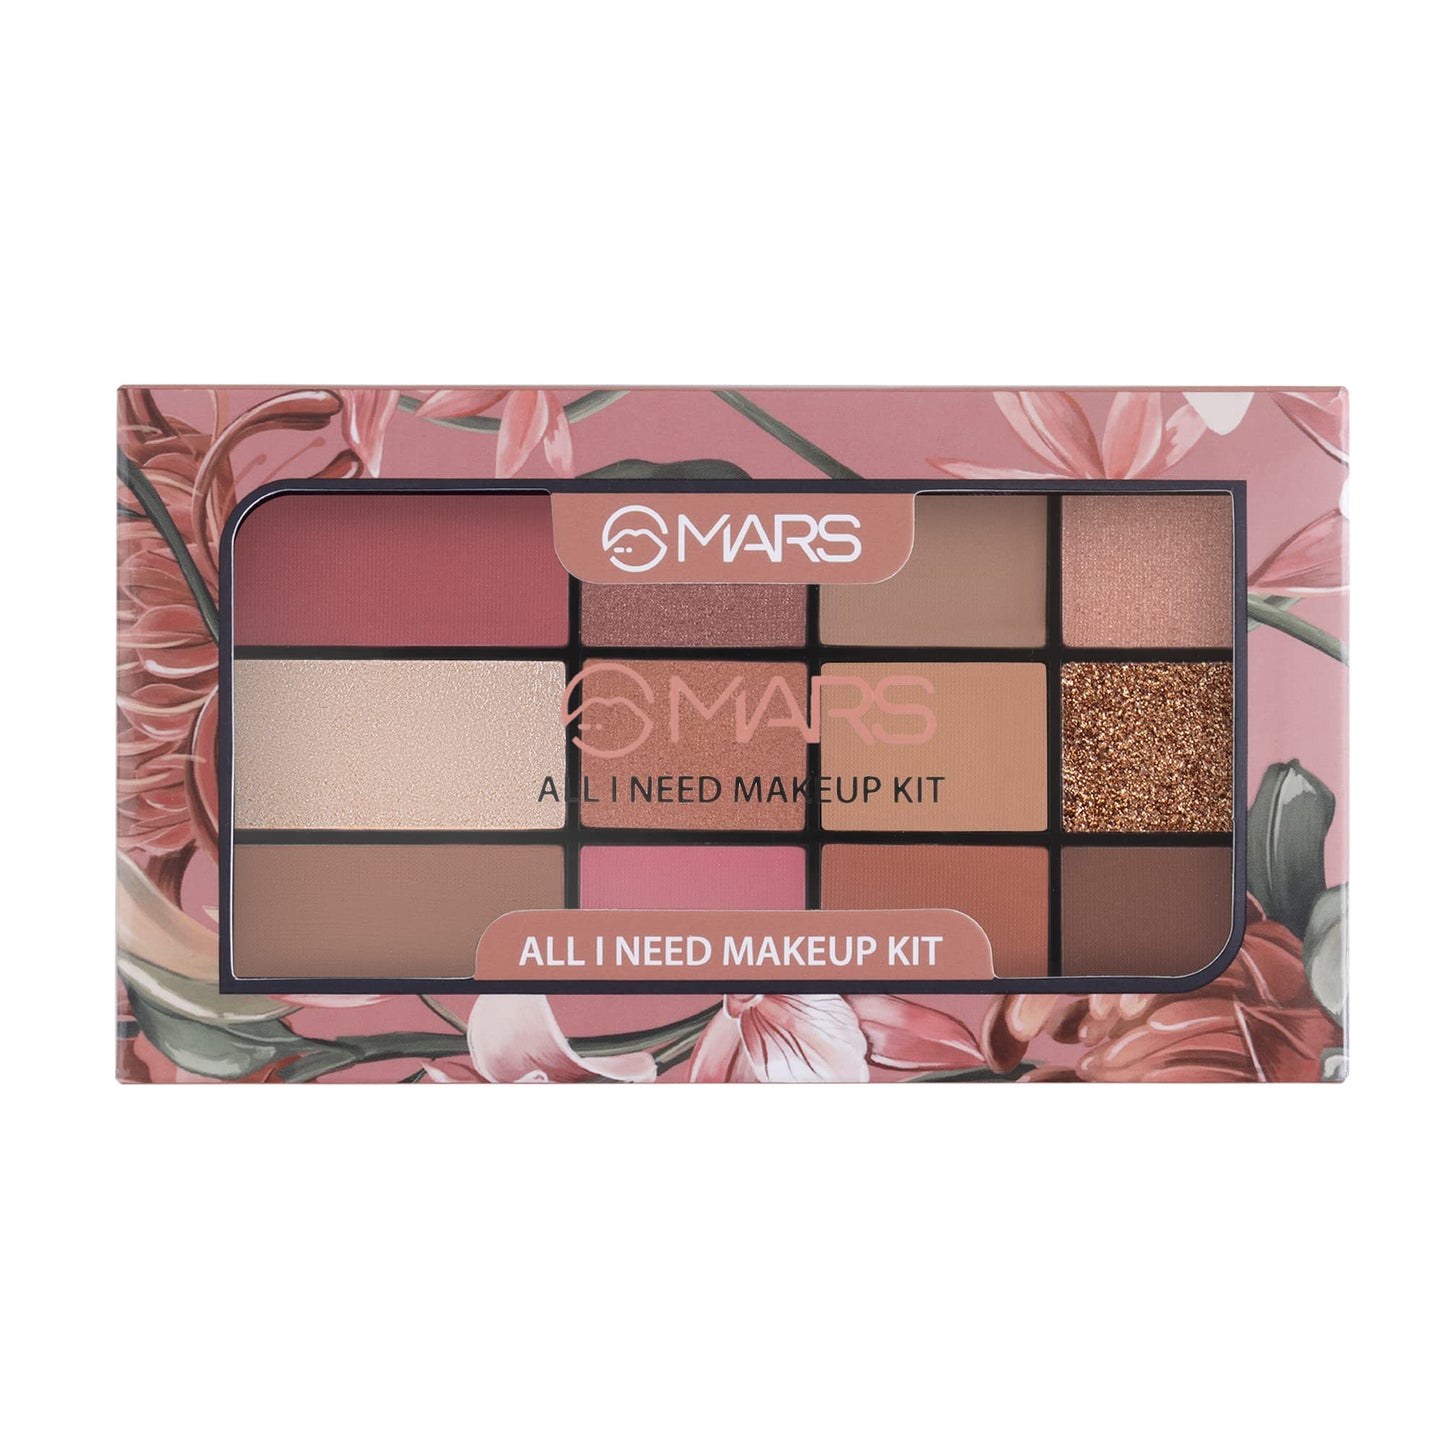 Mars 9 Color Eyeshadow With Highlighter Blusher And Bronzer Need Makeup Kit, Multicolor-Mk102-1 Pack Of 1